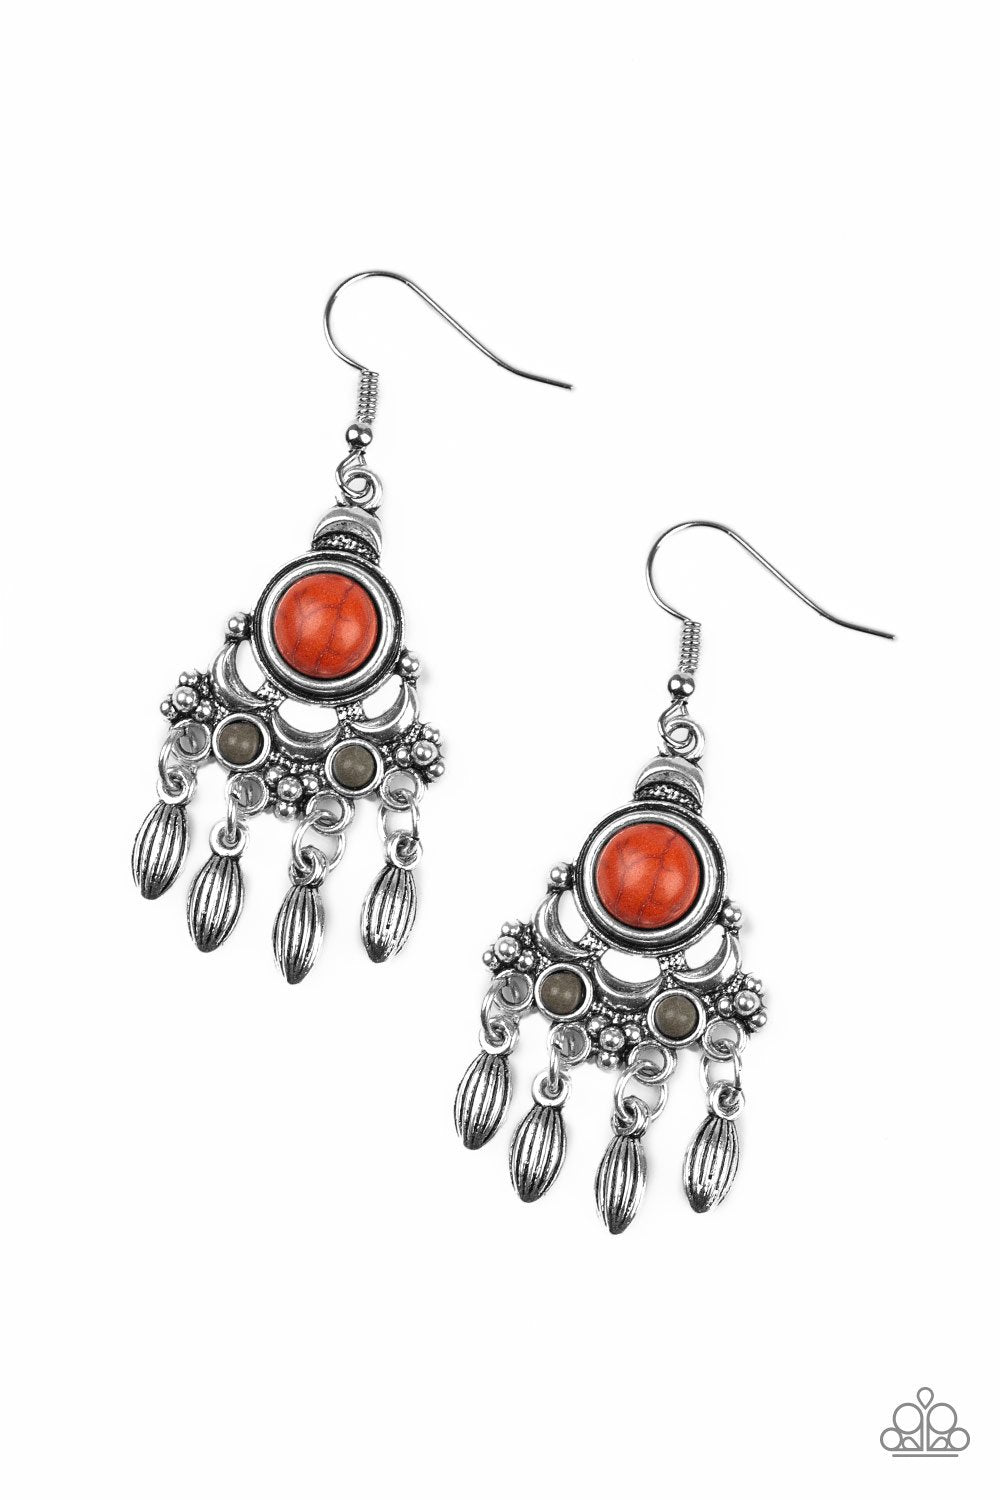 No Place Like Homestead Multi - Orange and Gray Stone Earrings - Paparazzi Accessories-CarasShop.com - $5 Jewelry by Cara Jewels